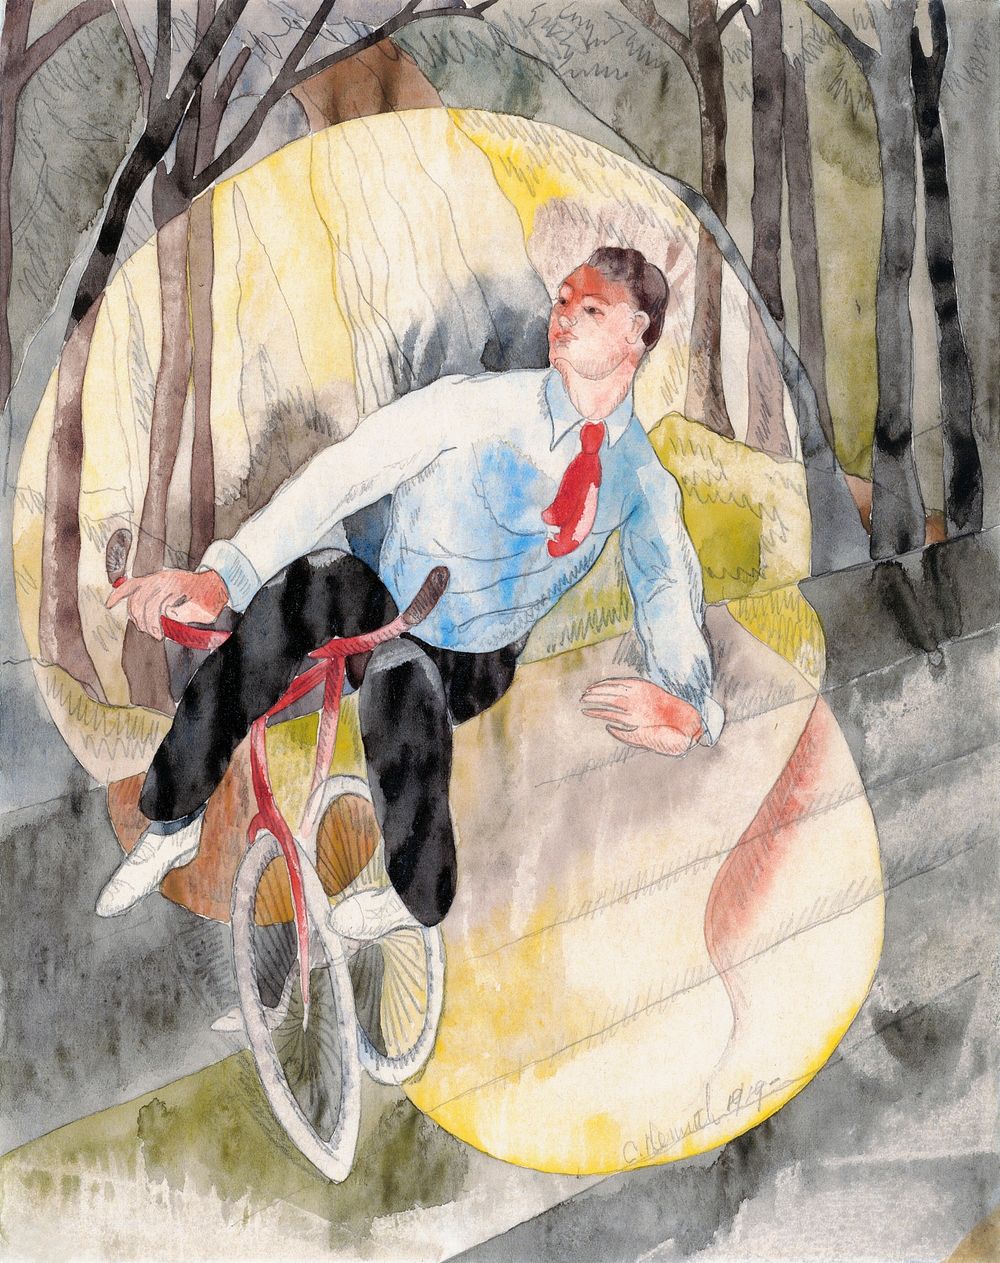 In Vaudeville, the Bicycle Rider (1919) painting in high resolution by Charles Demuth. Original from National Gallery of…